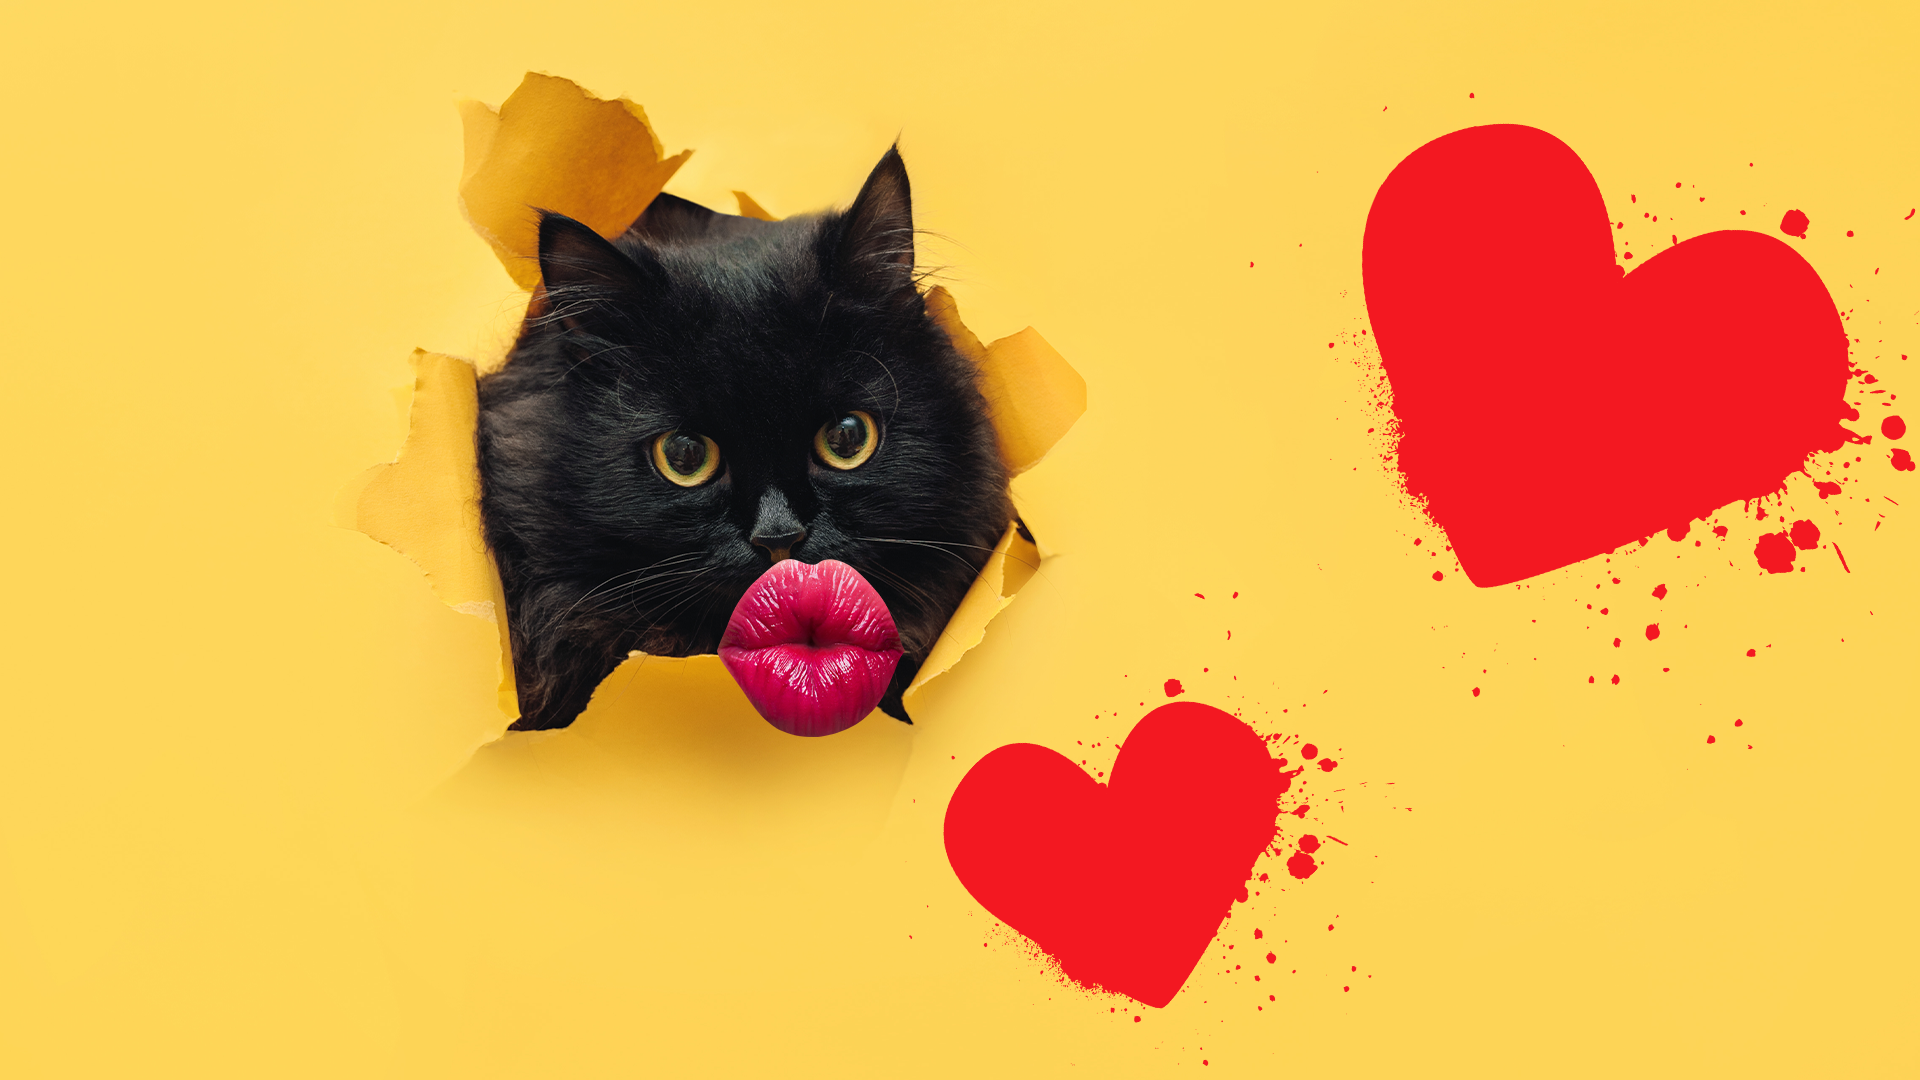 Cat breaking through yellow wall with pouty lips and love heart symbols 